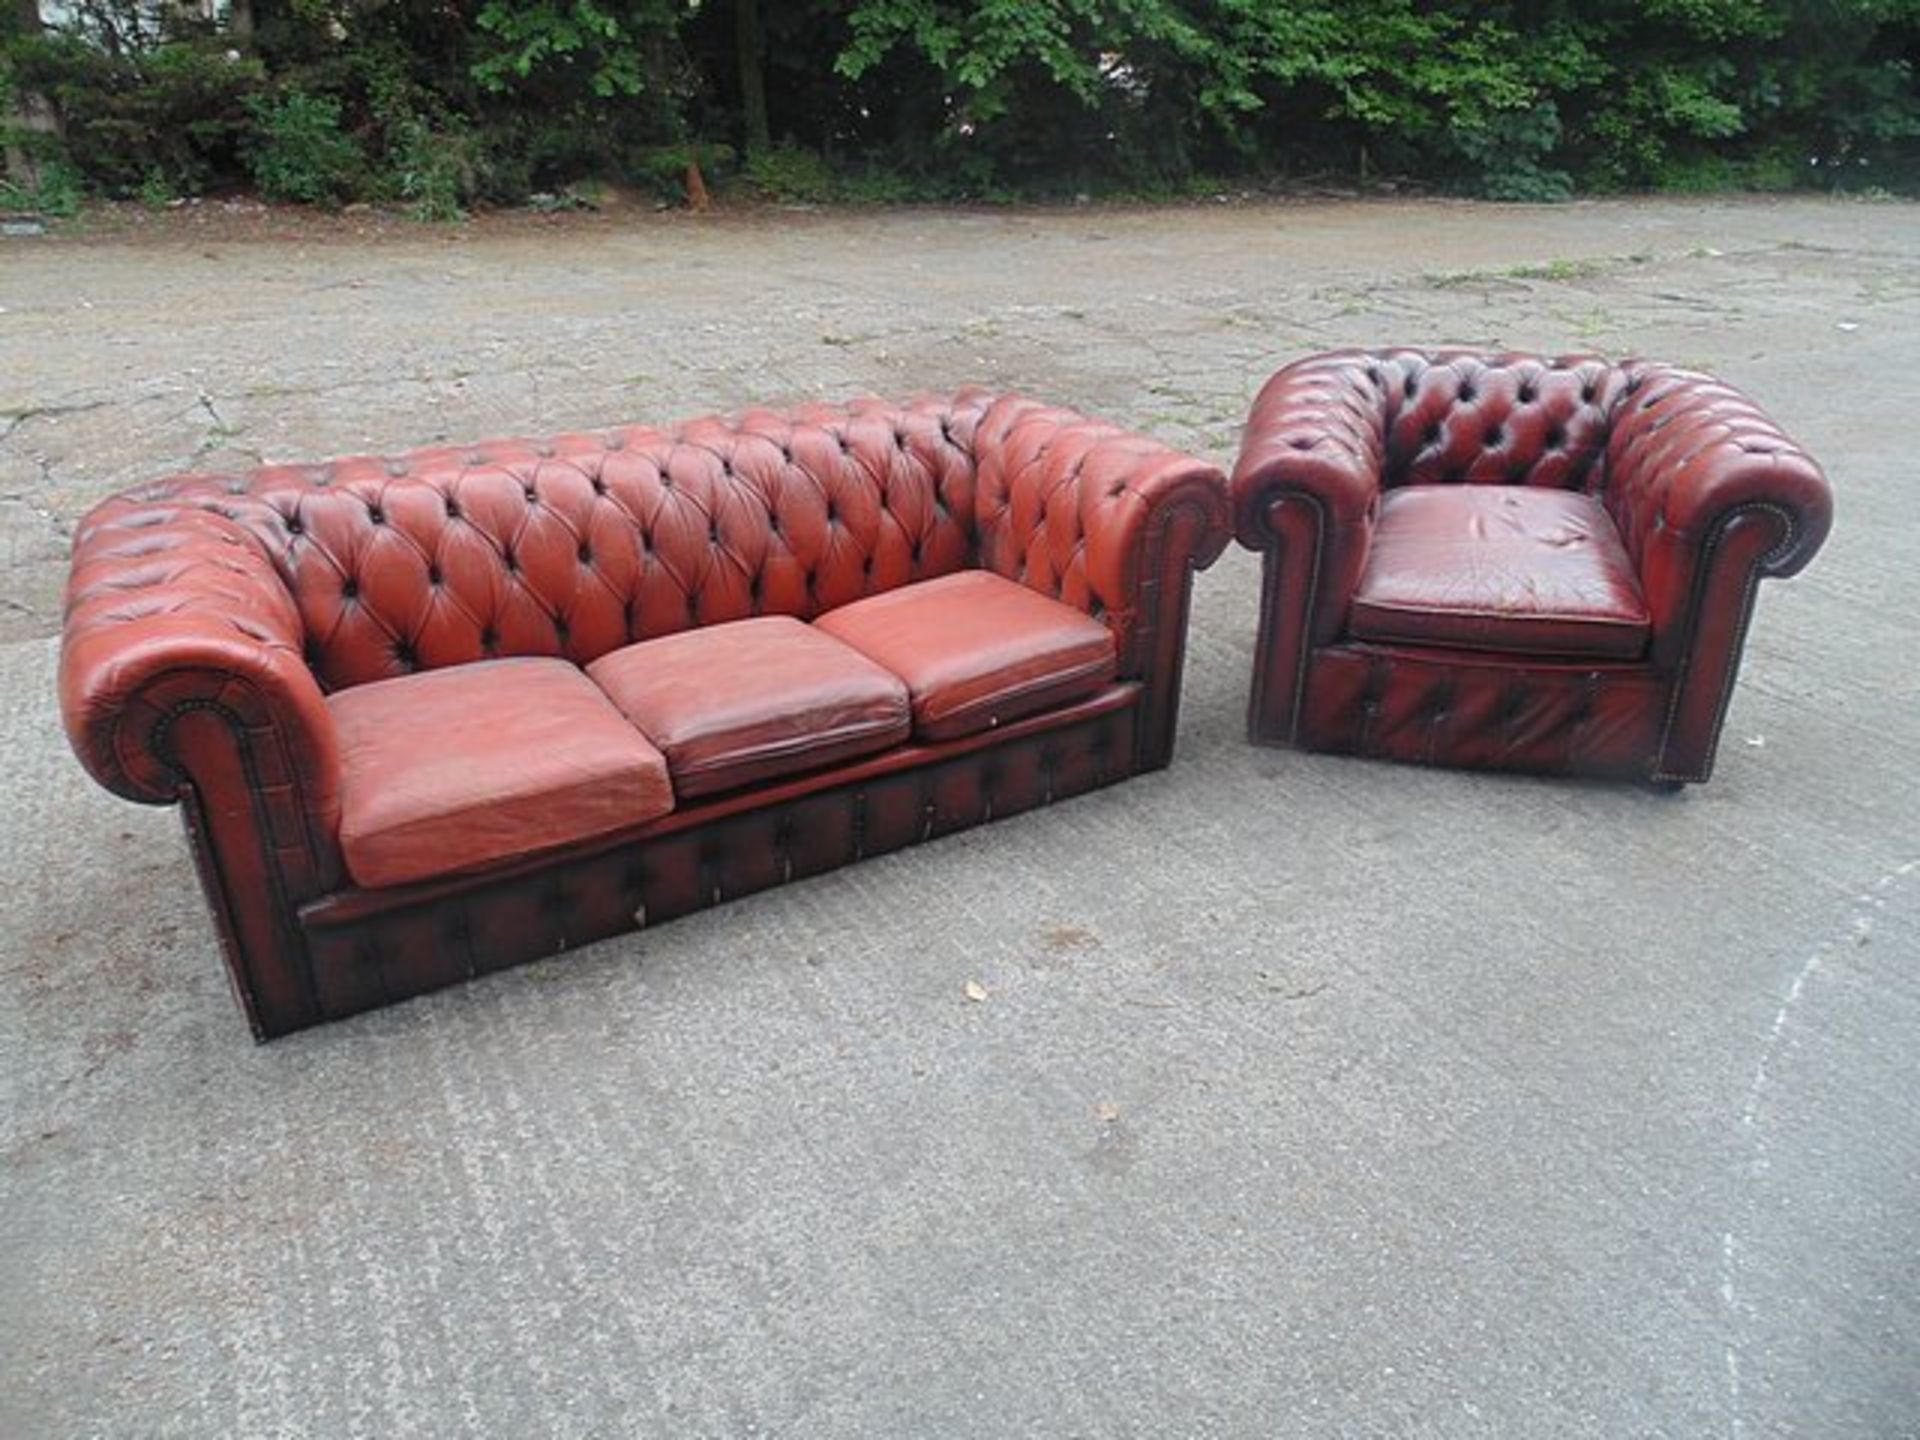 Chesterfield ox-blood tufterd sofa and armchair sofa dimensions 1900mm x 500mm x 660mm chair